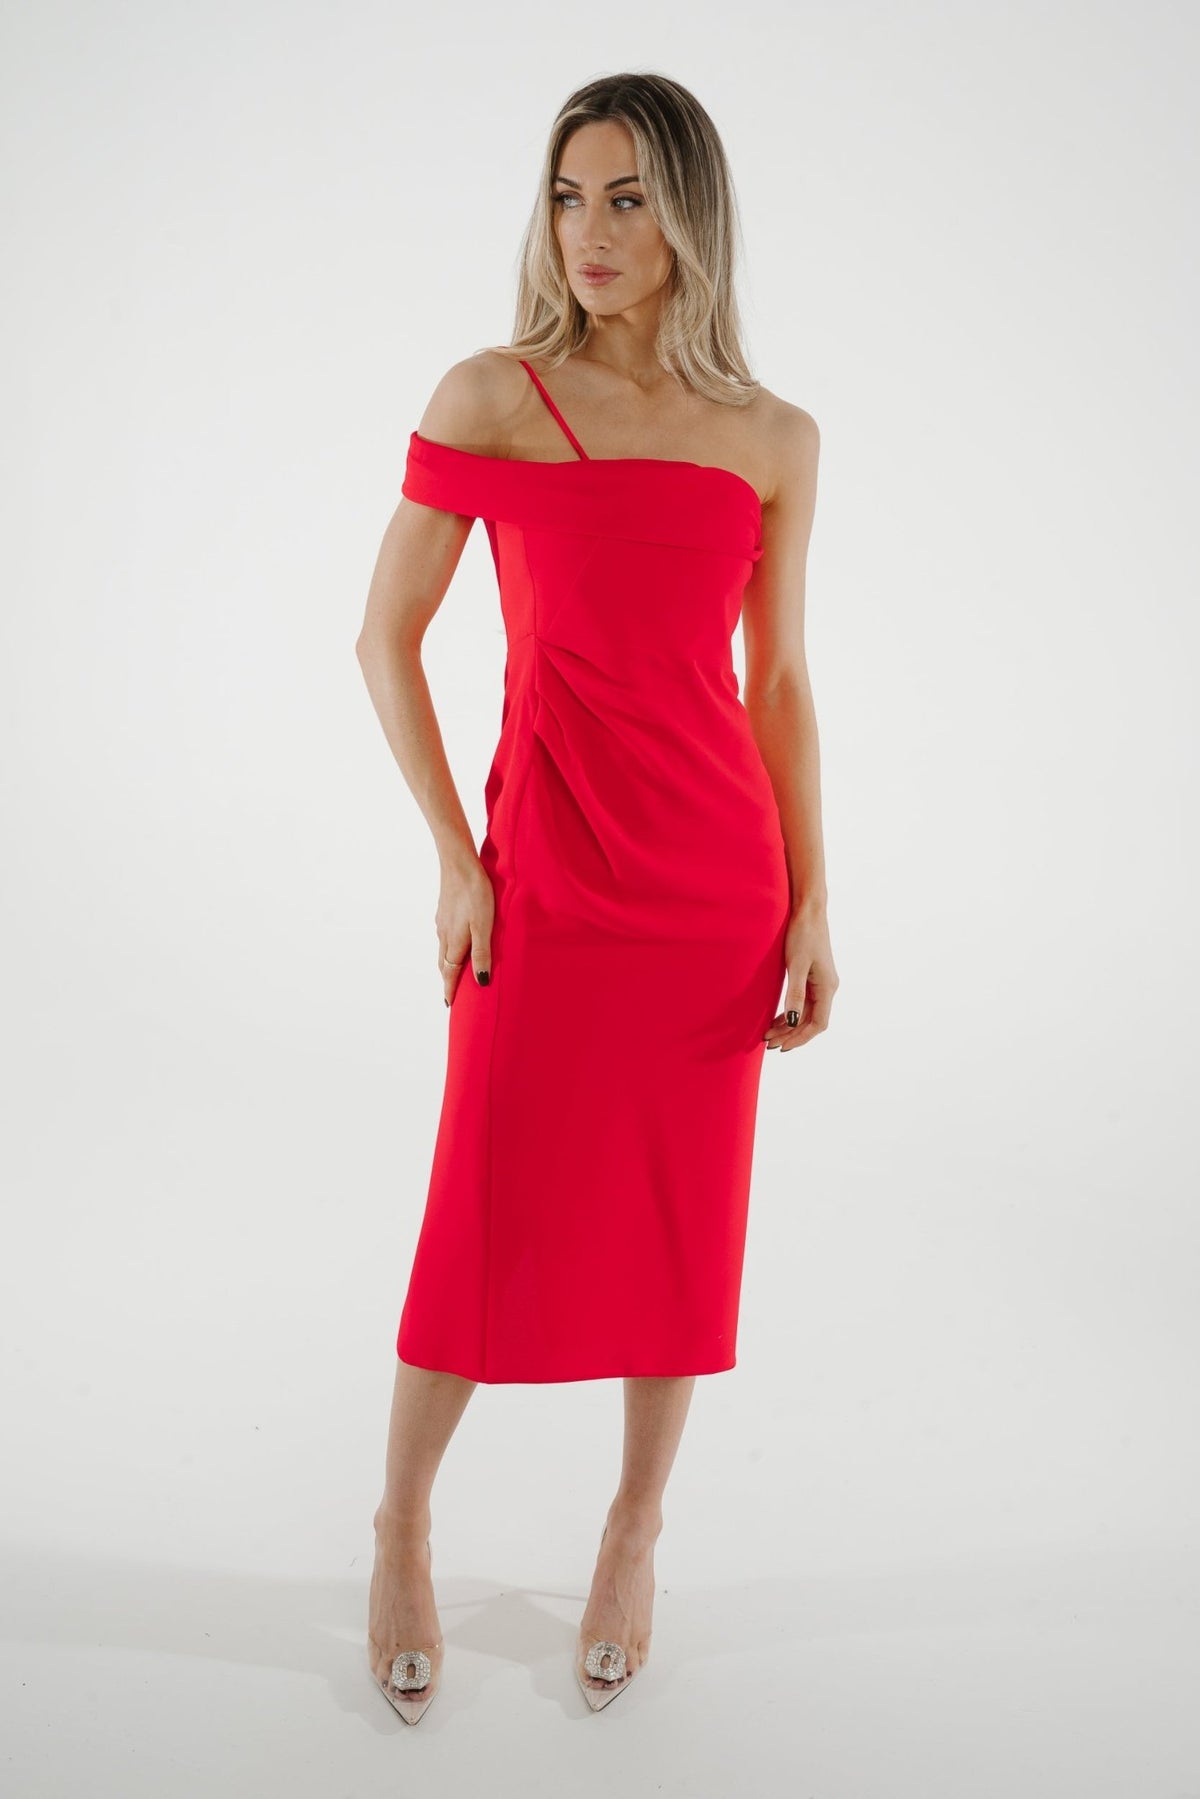 Kayla One Shoulder Dress In Coral Red - The Walk in Wardrobe